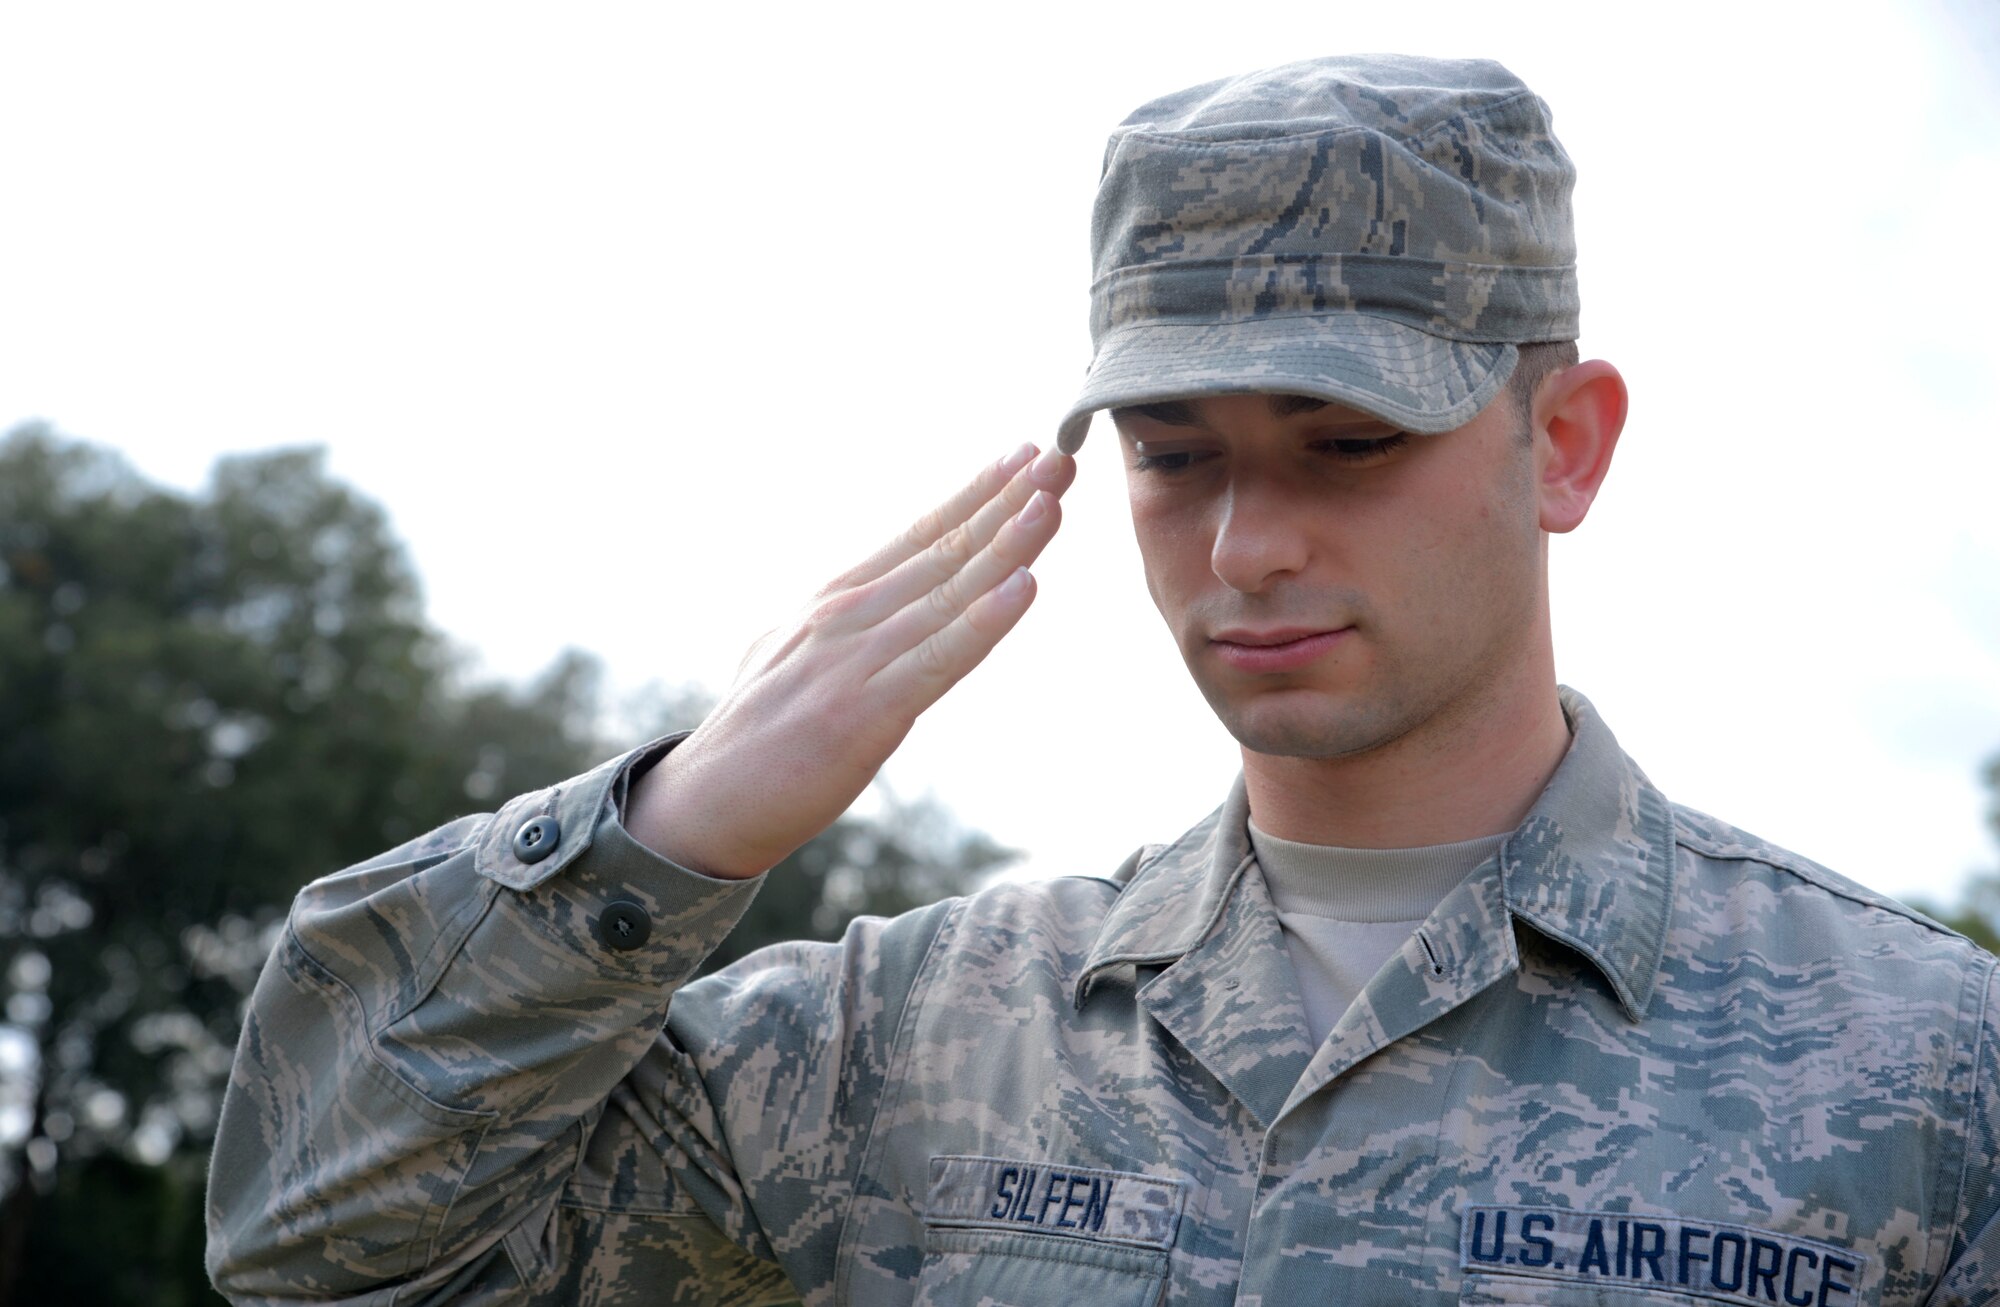 Senior Airman Corey Silfen, radiology technician with the 6th Medical Support Squadron, renders a salute after laying a wreath on a gravesite at Florida National Cemetery in Bushnell, Fla., Dec. 17, 2016. Silfen participated in Wreaths Across America, an organization that places wreaths on gravesites of fallen heroes during the holiday season. (U.S. Air Force photo by Senior Airman Tori Schultz)